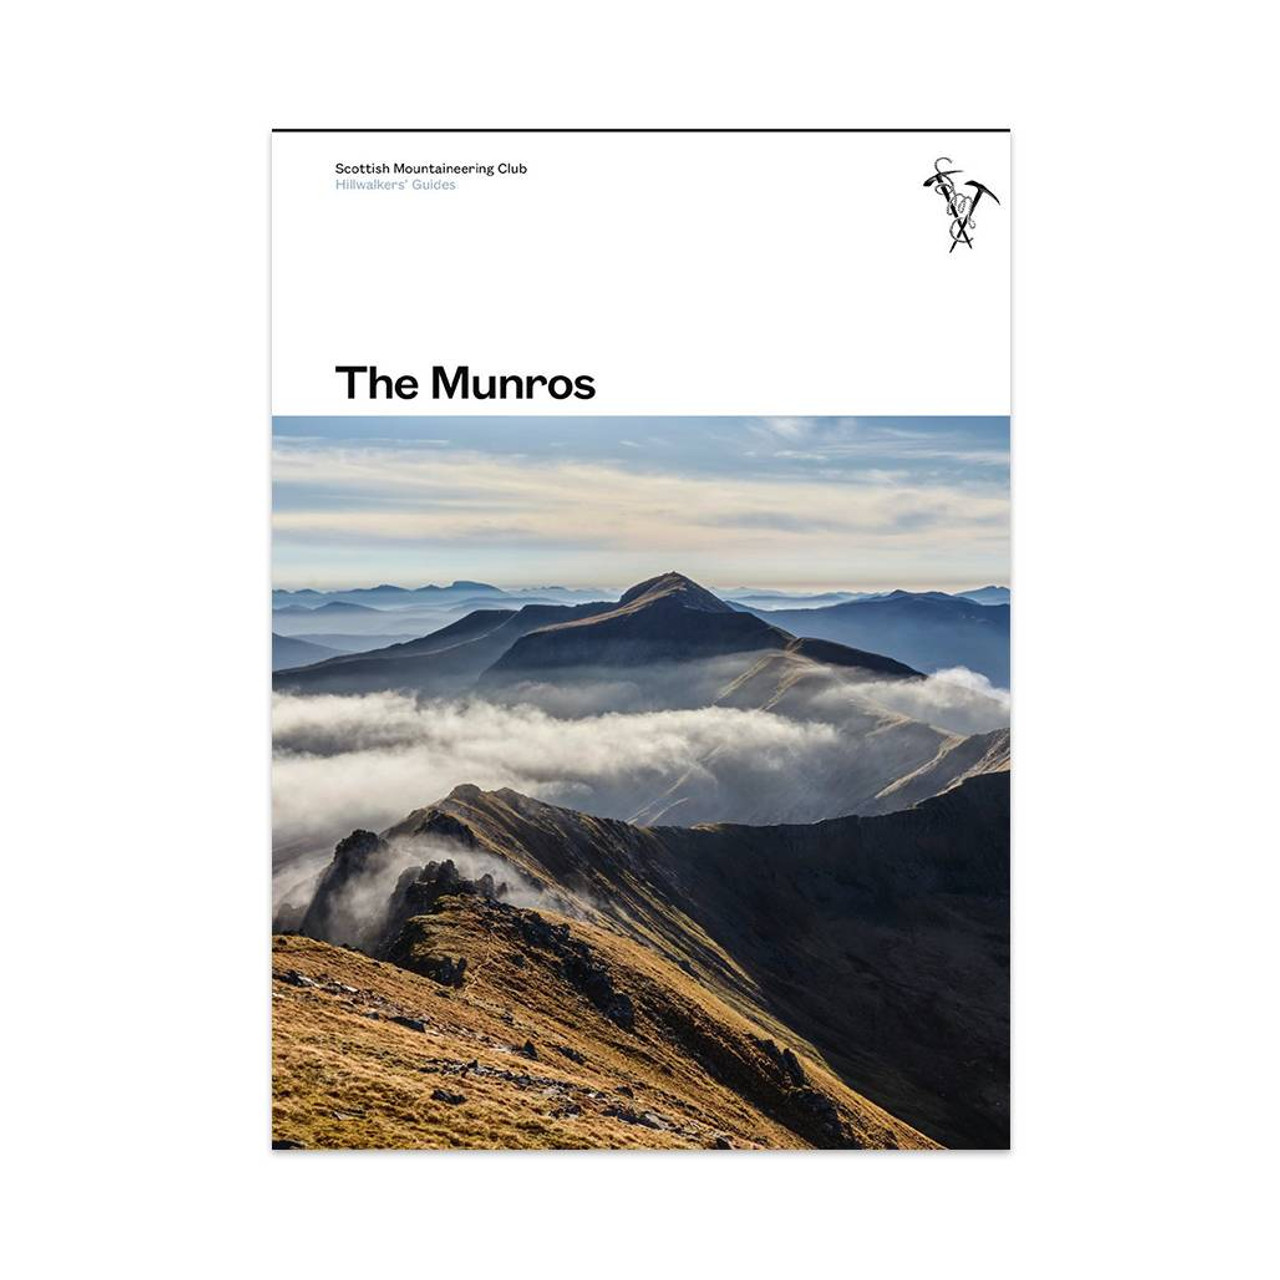 The Munros: Scottish Mountaineering Club Hillwalkers Guide